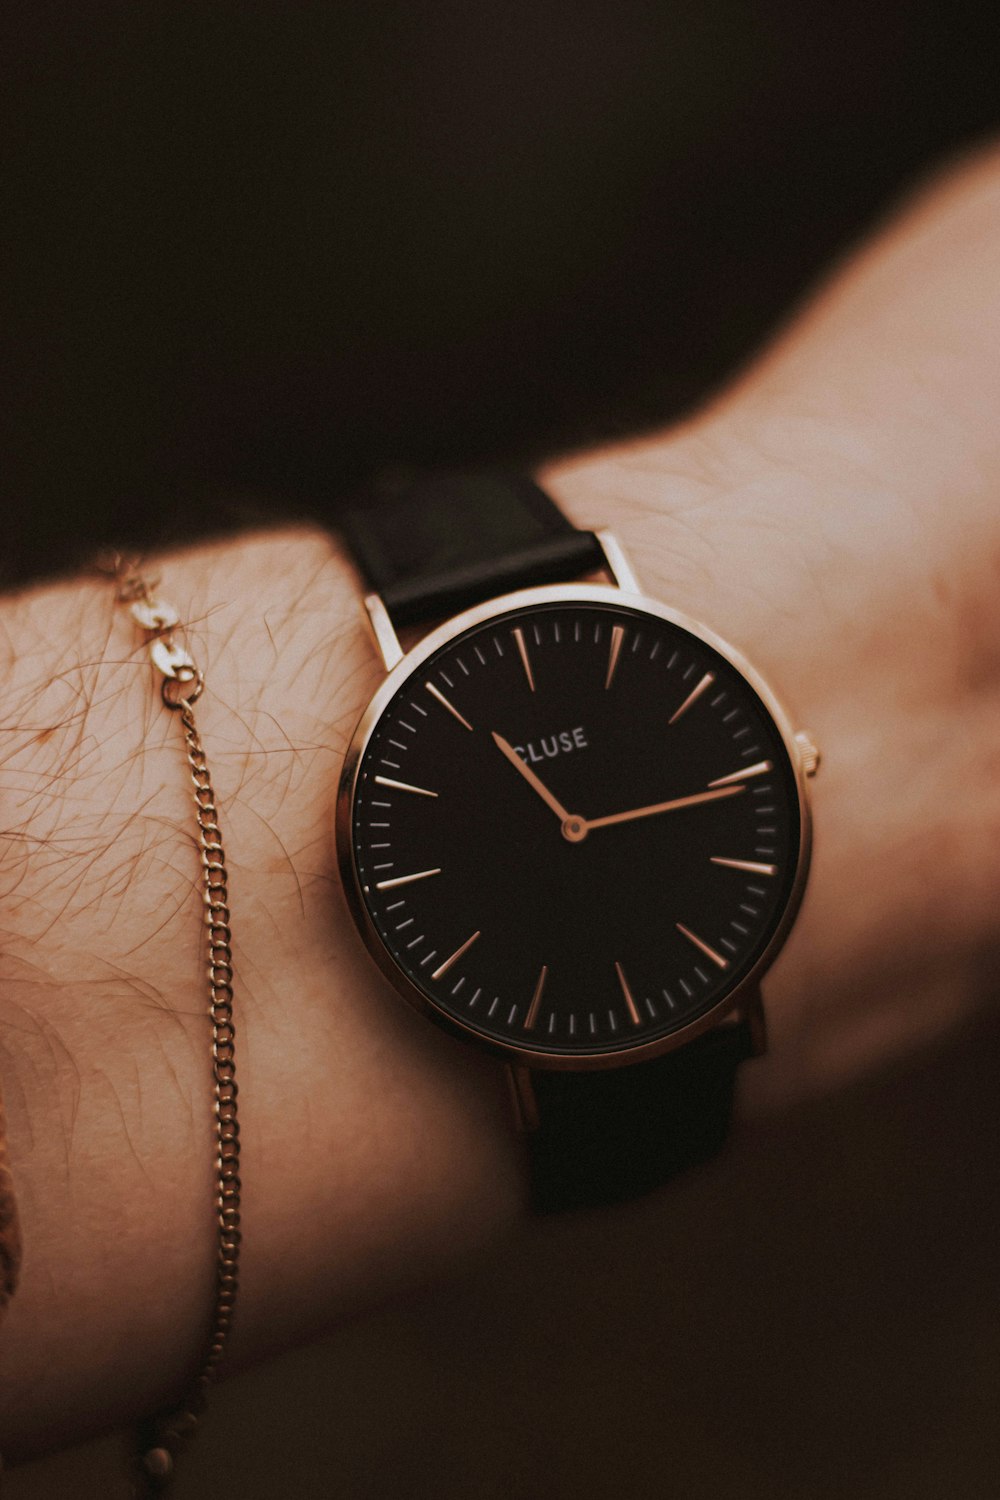 person wearing round copper-colored analog watch